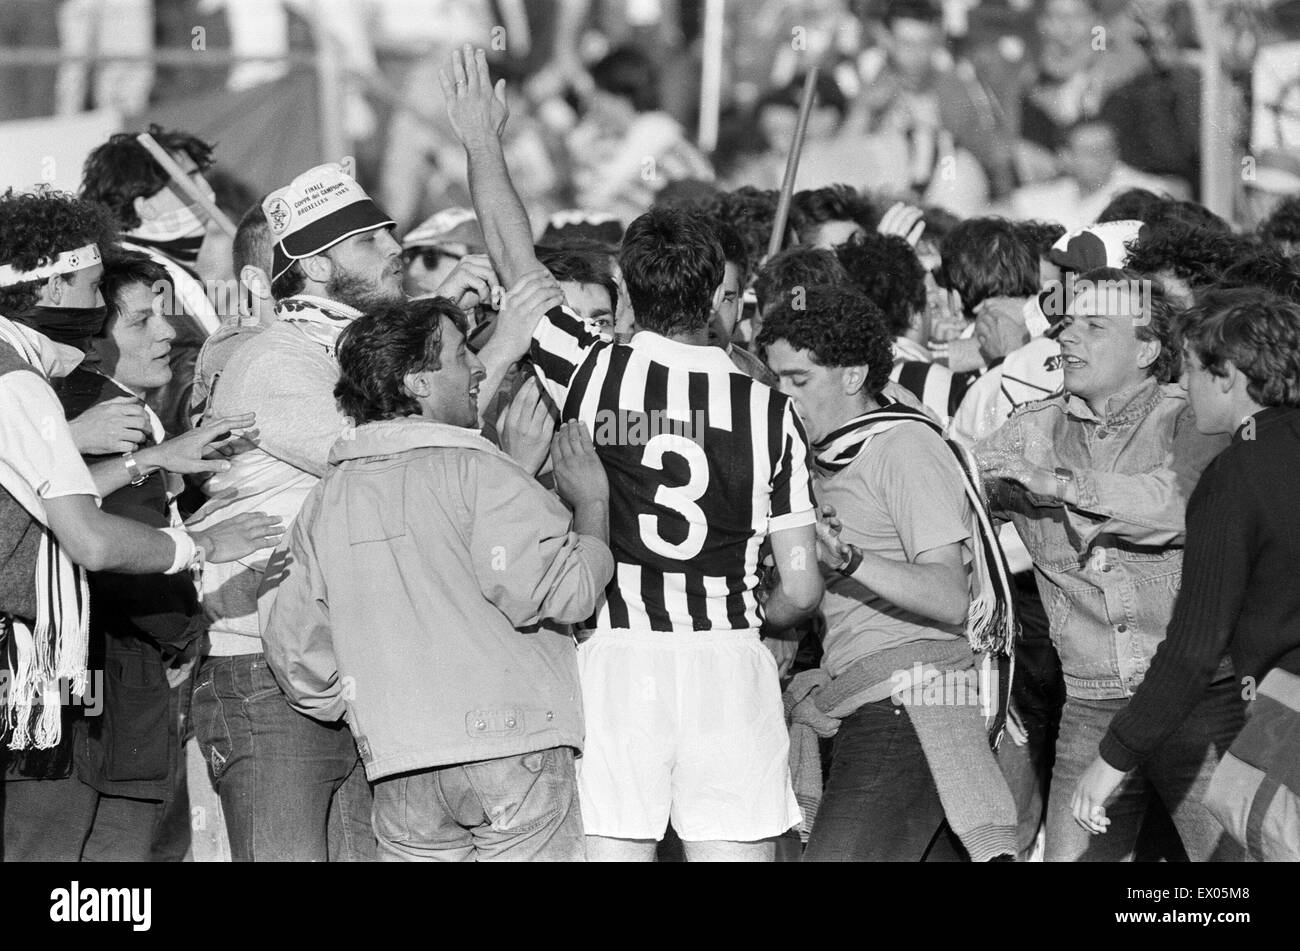 Juventus 1-0 Liverpool, 1985 European Cup Final, Heysel Stadium, Brussels, Wednesday 29th May 1985. Crowd Violence. Antonio Cabrini of Juventus, appeals for calm. Stock Photo